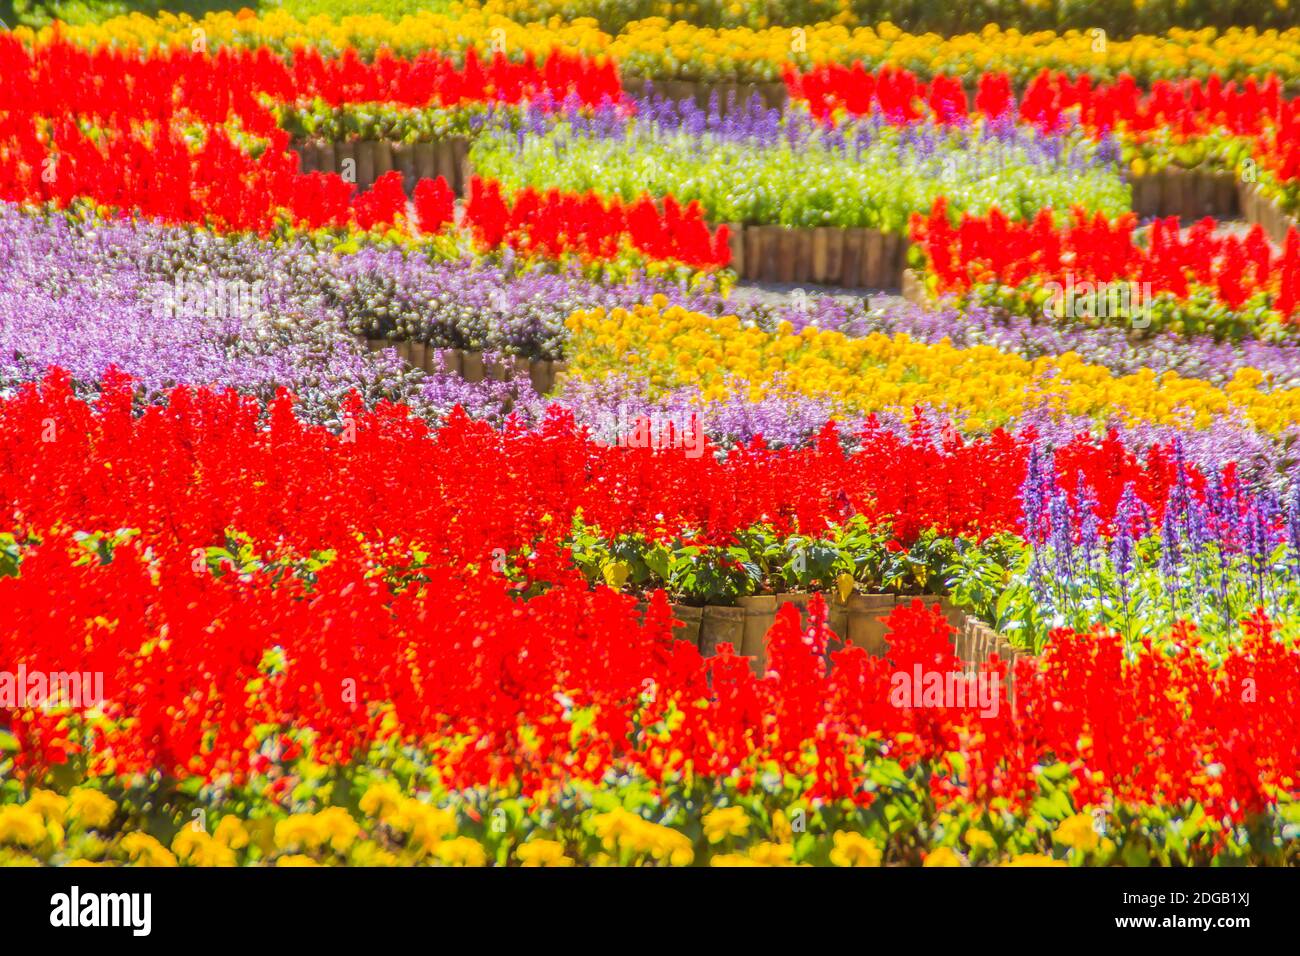 Colorful flowers at Mae Fah Luang Garden, Chiang Rai, Thailand. Garden of cold winter flowers such as Salvia Petunia Begonia roses, flowers, auspiciou Stock Photo